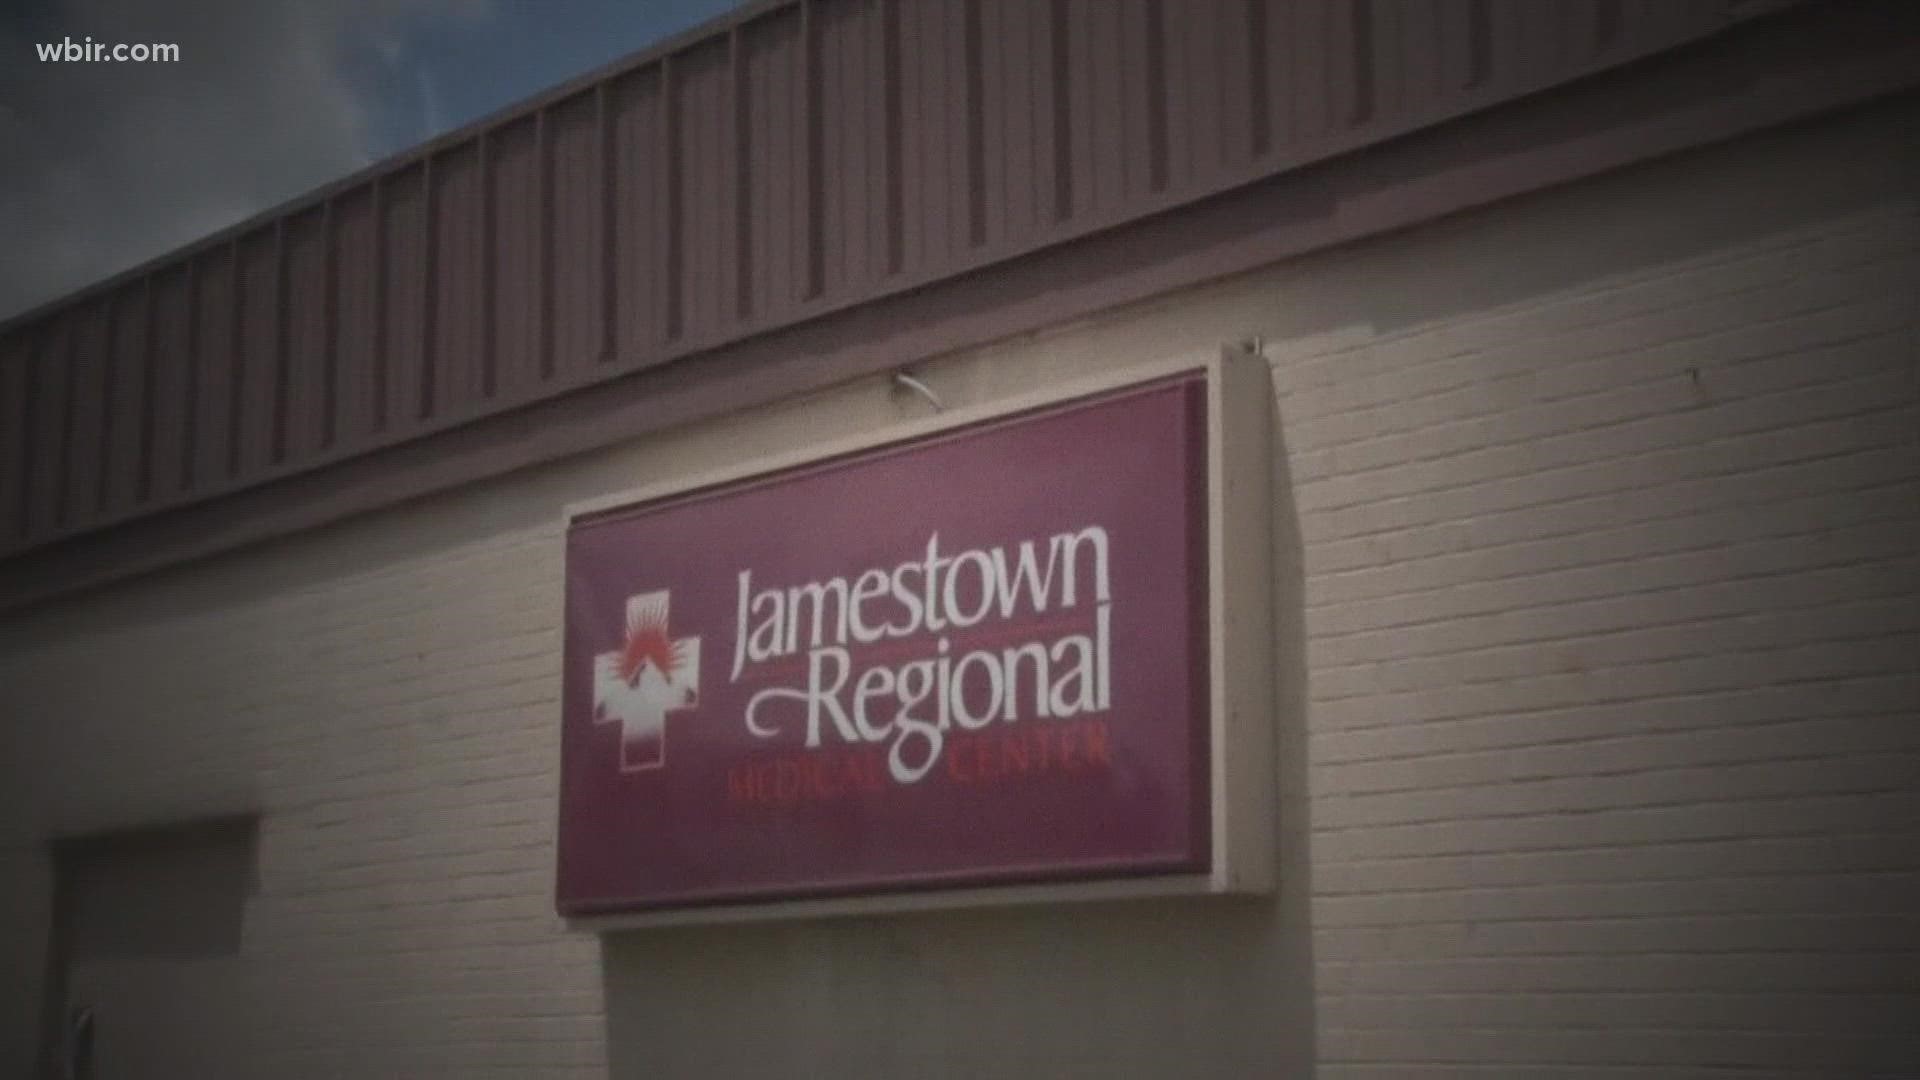 Records show the closed Jamestown Regional Medical Center got $121,000 in federal pandemic assistance funds.